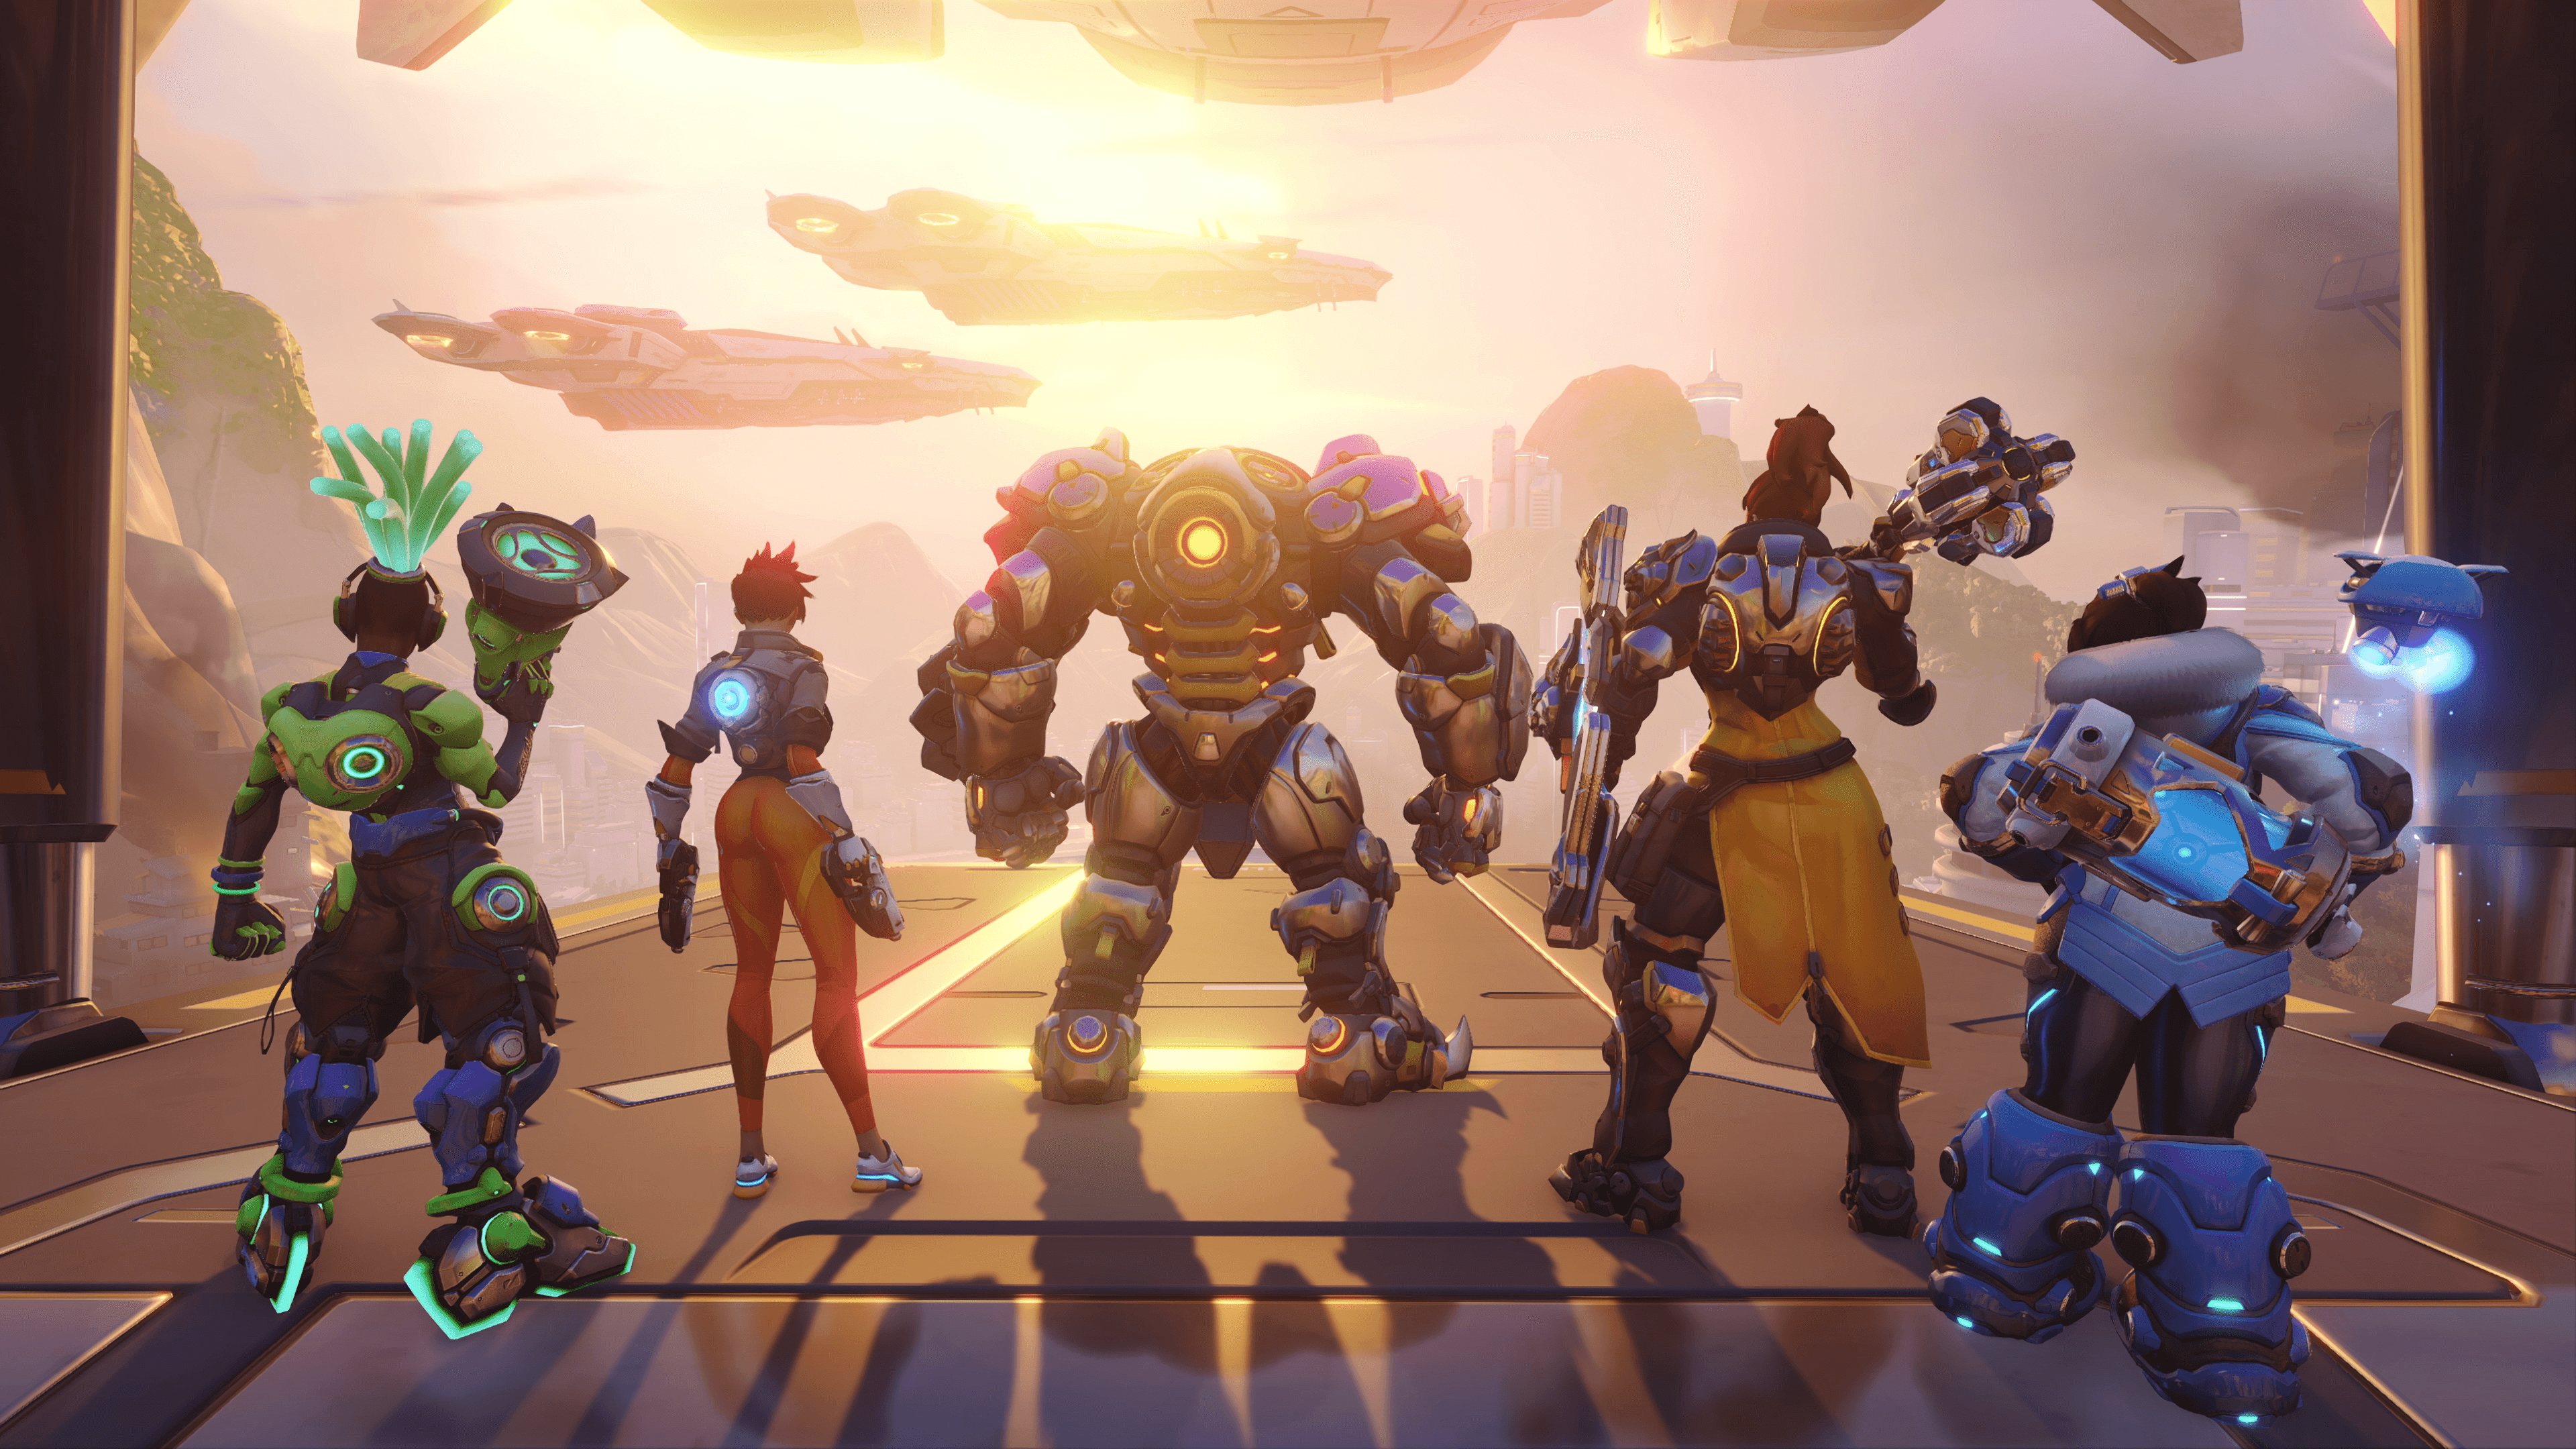 Overwatch heroes staring off into a sunrise